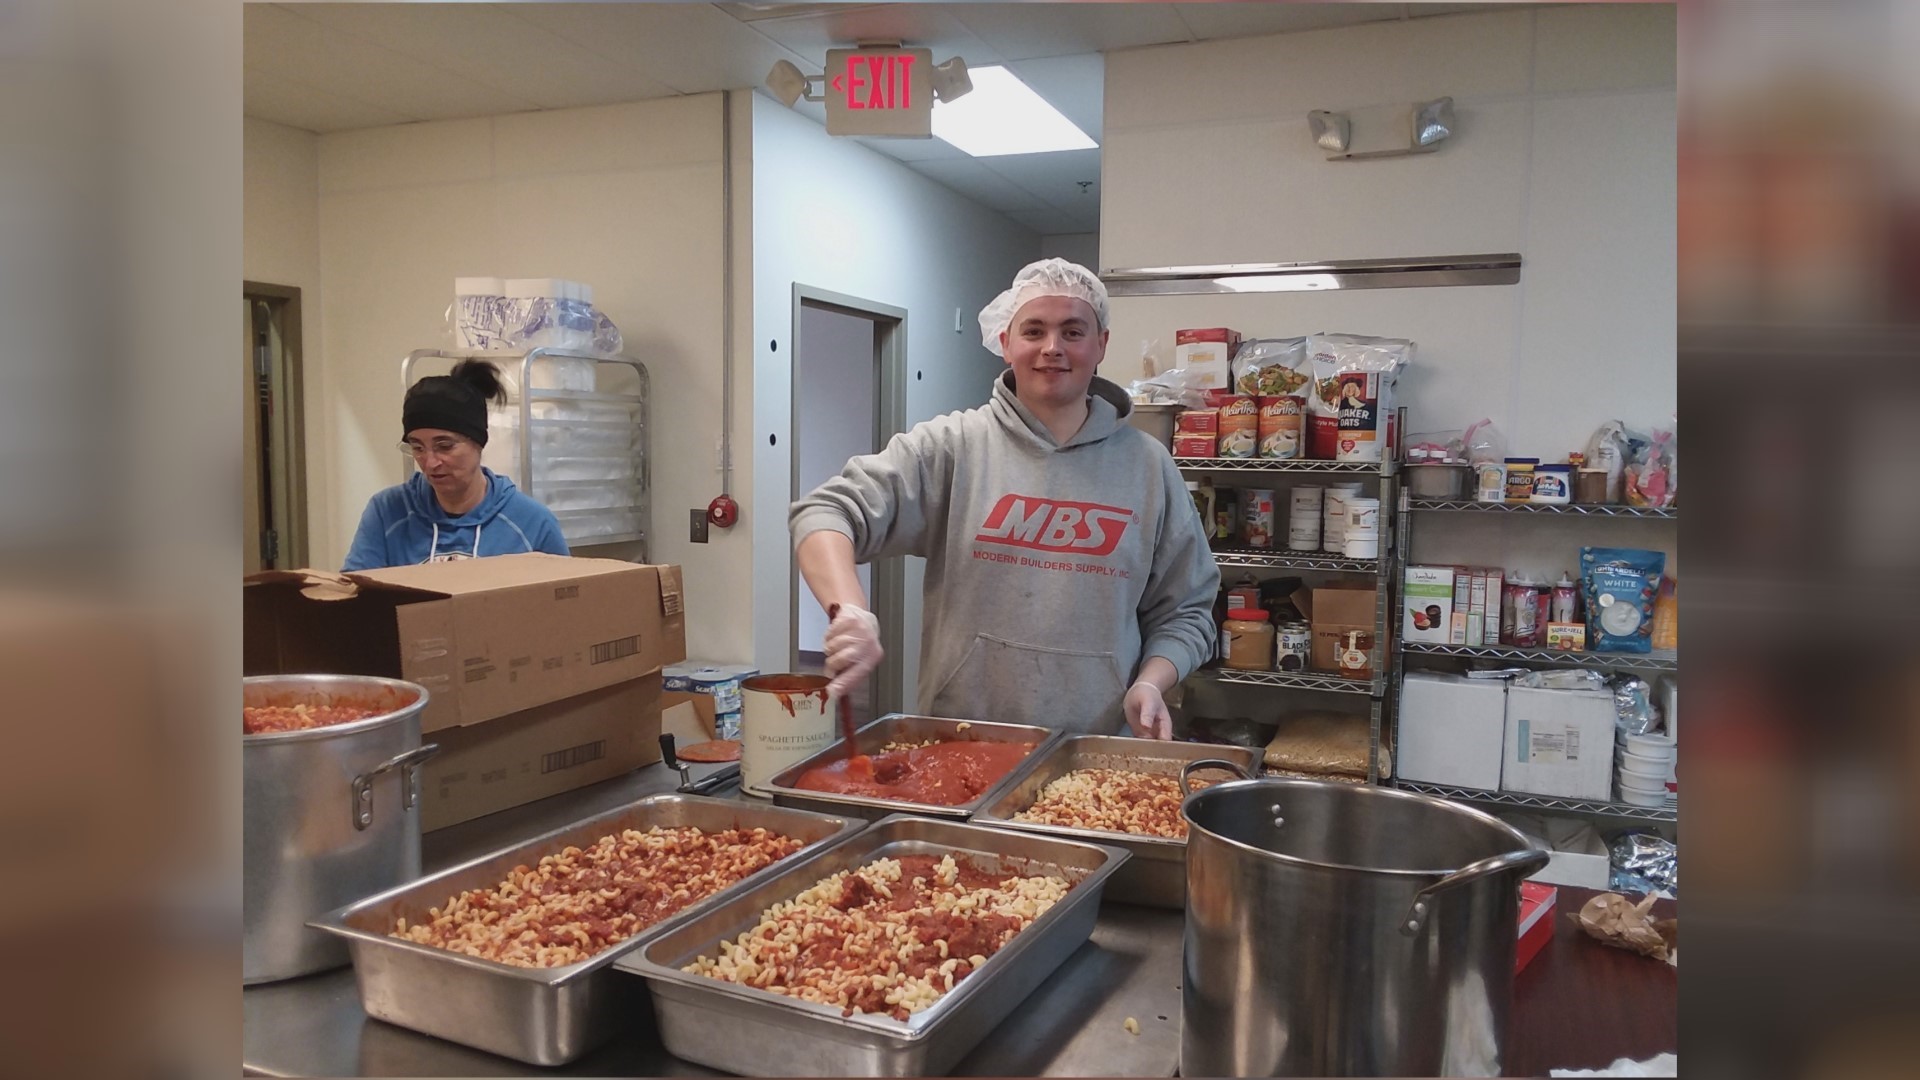 Over the last three weeks, Bistro 163 has given out more than 1,300 meals a week